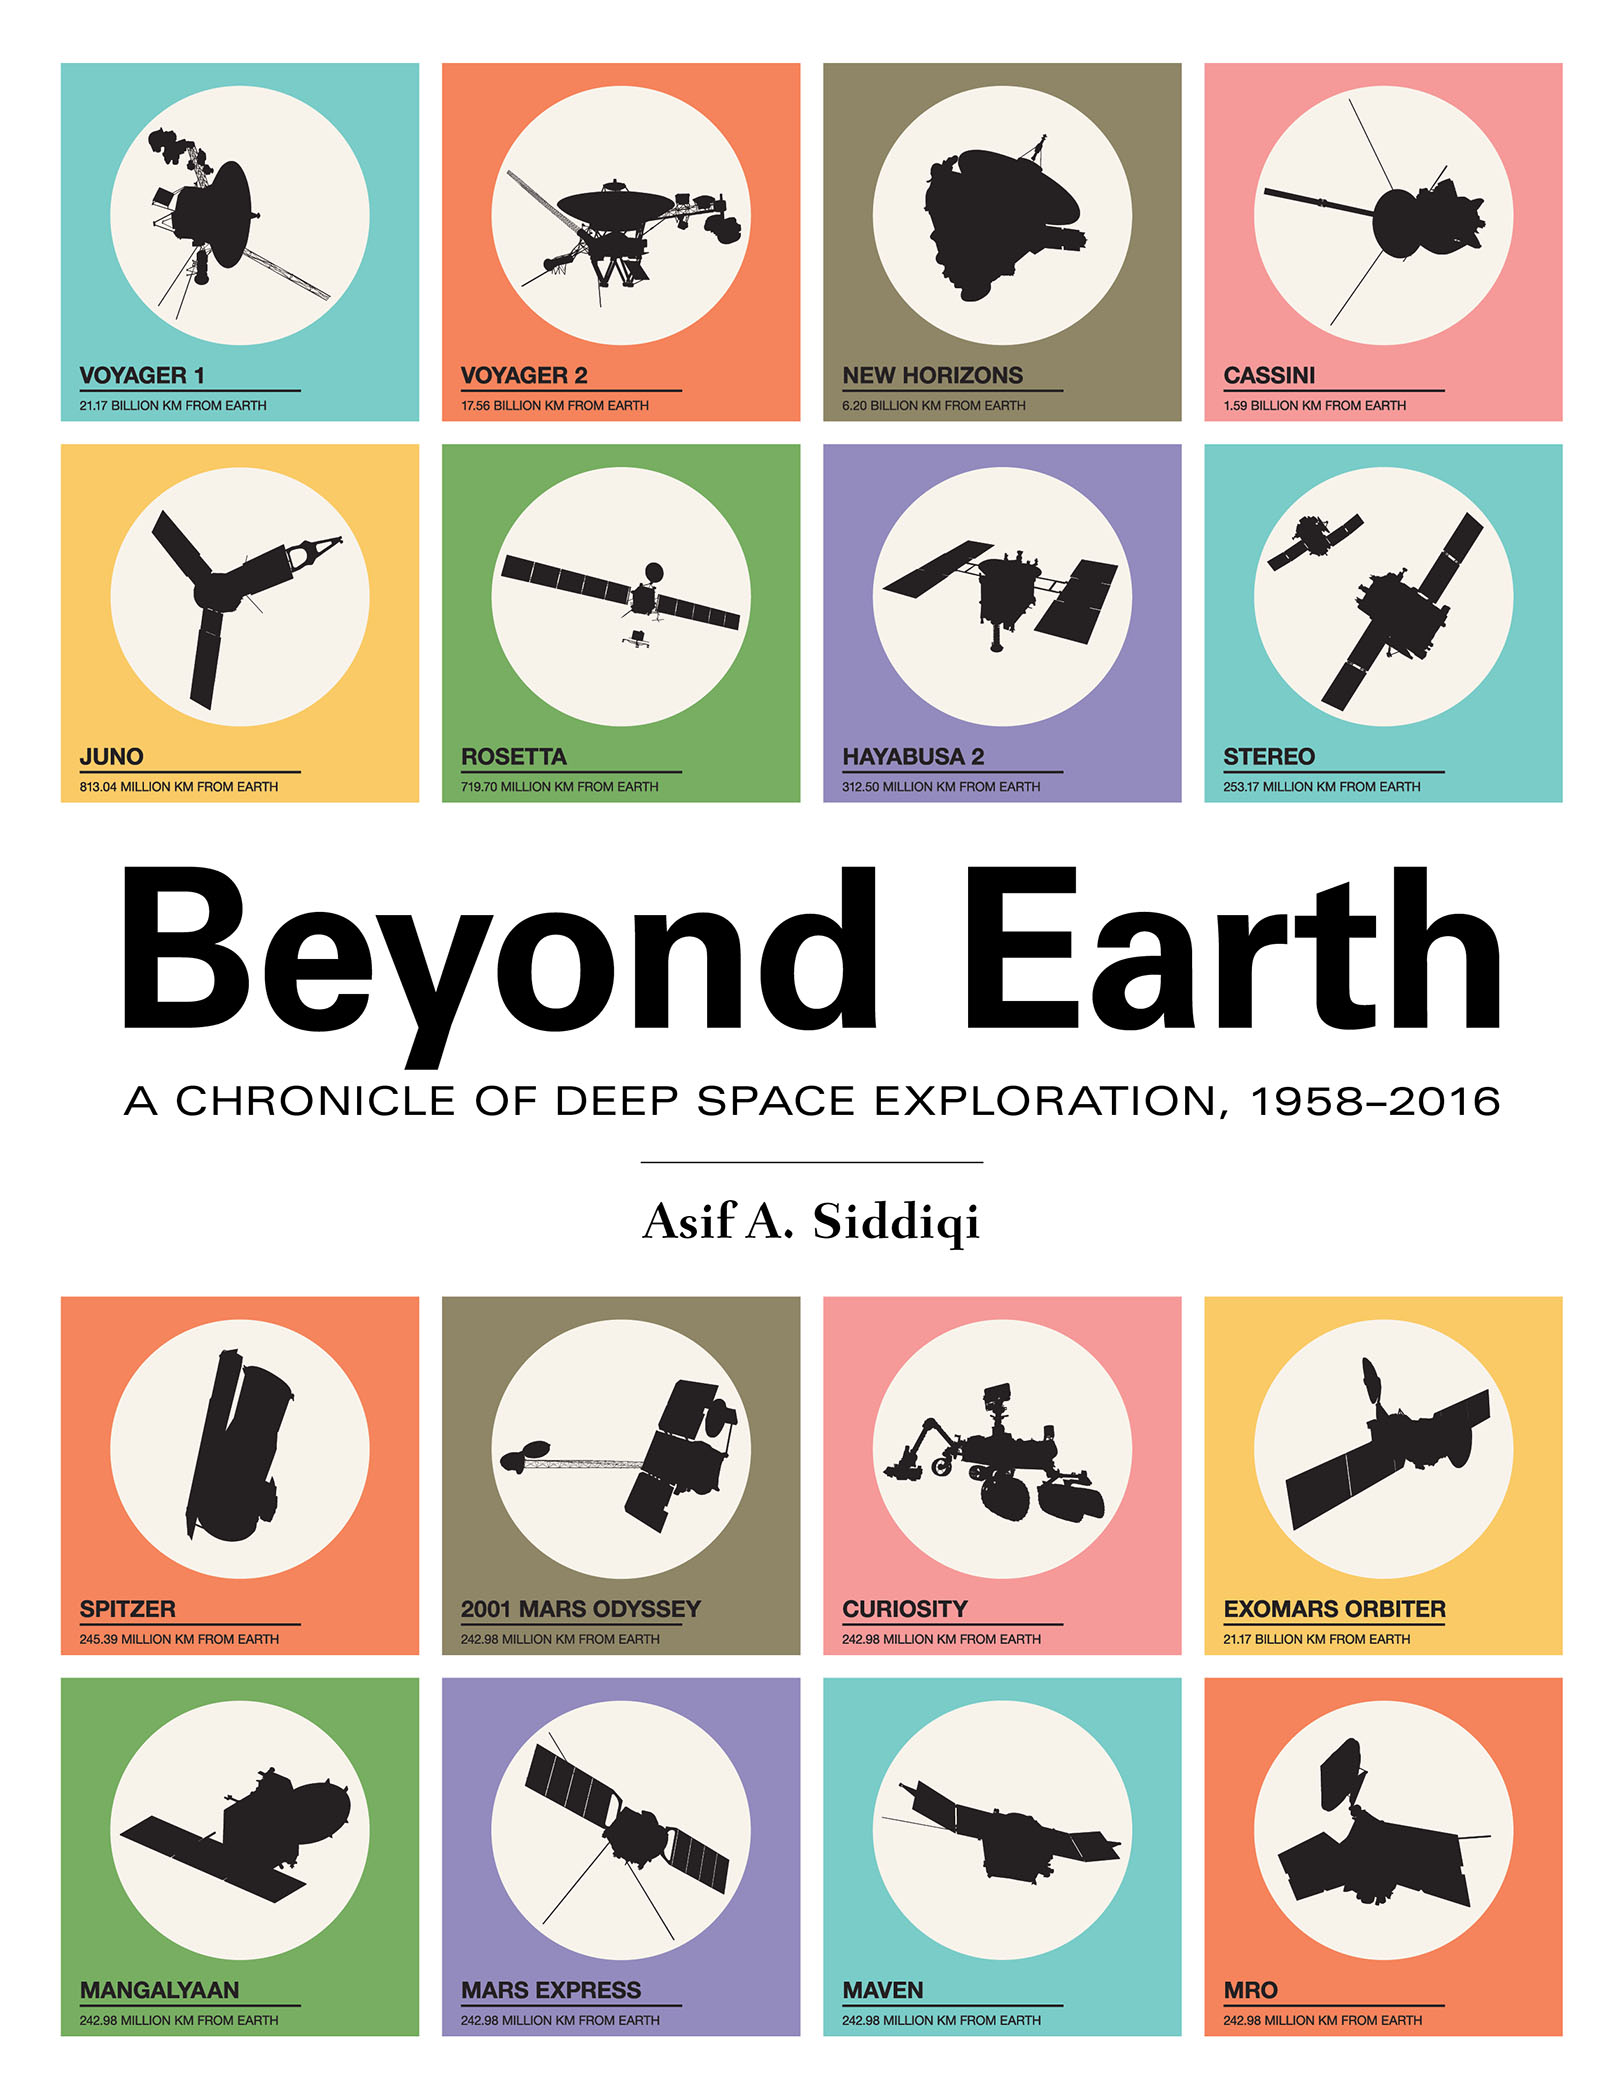 Beyond Earth: A Chronicle of Deep Space Exploration pdf